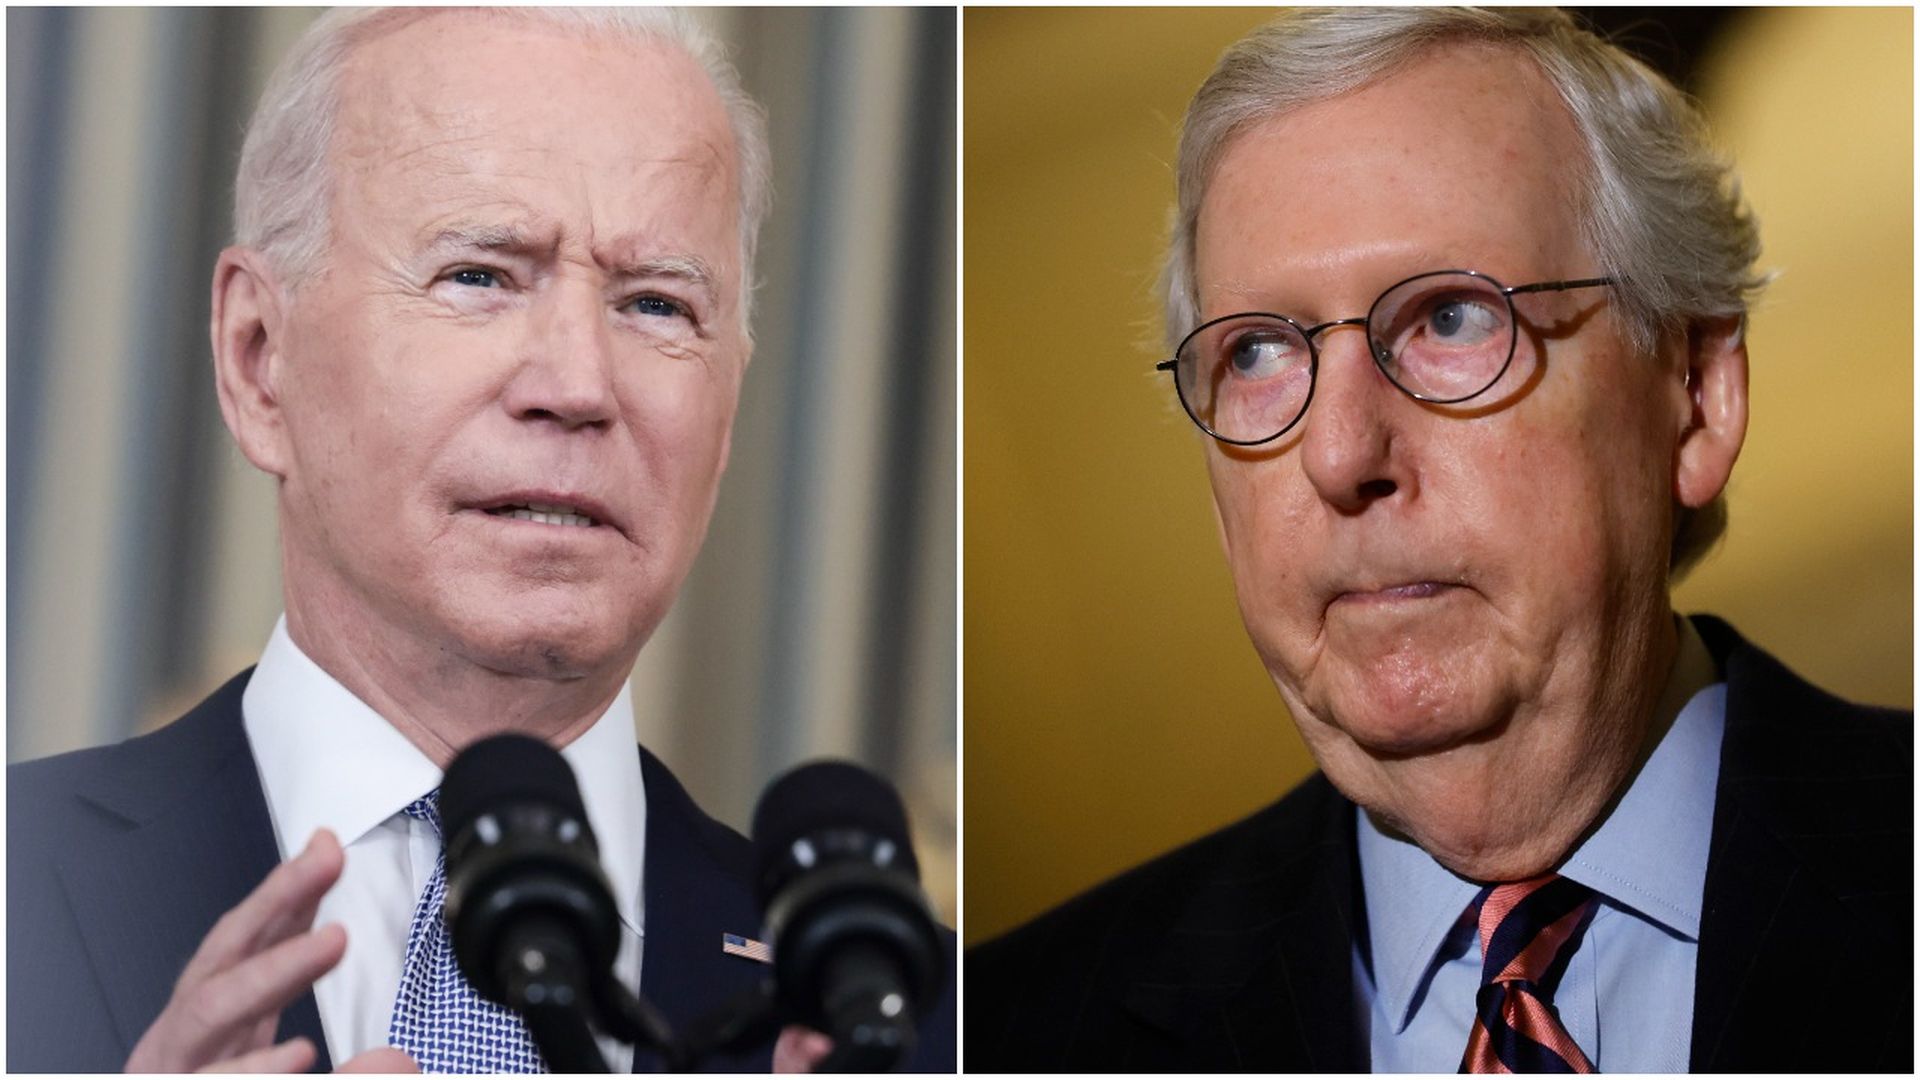 Photo of Joe Biden speaking on the left and Mitch McConnell on the right